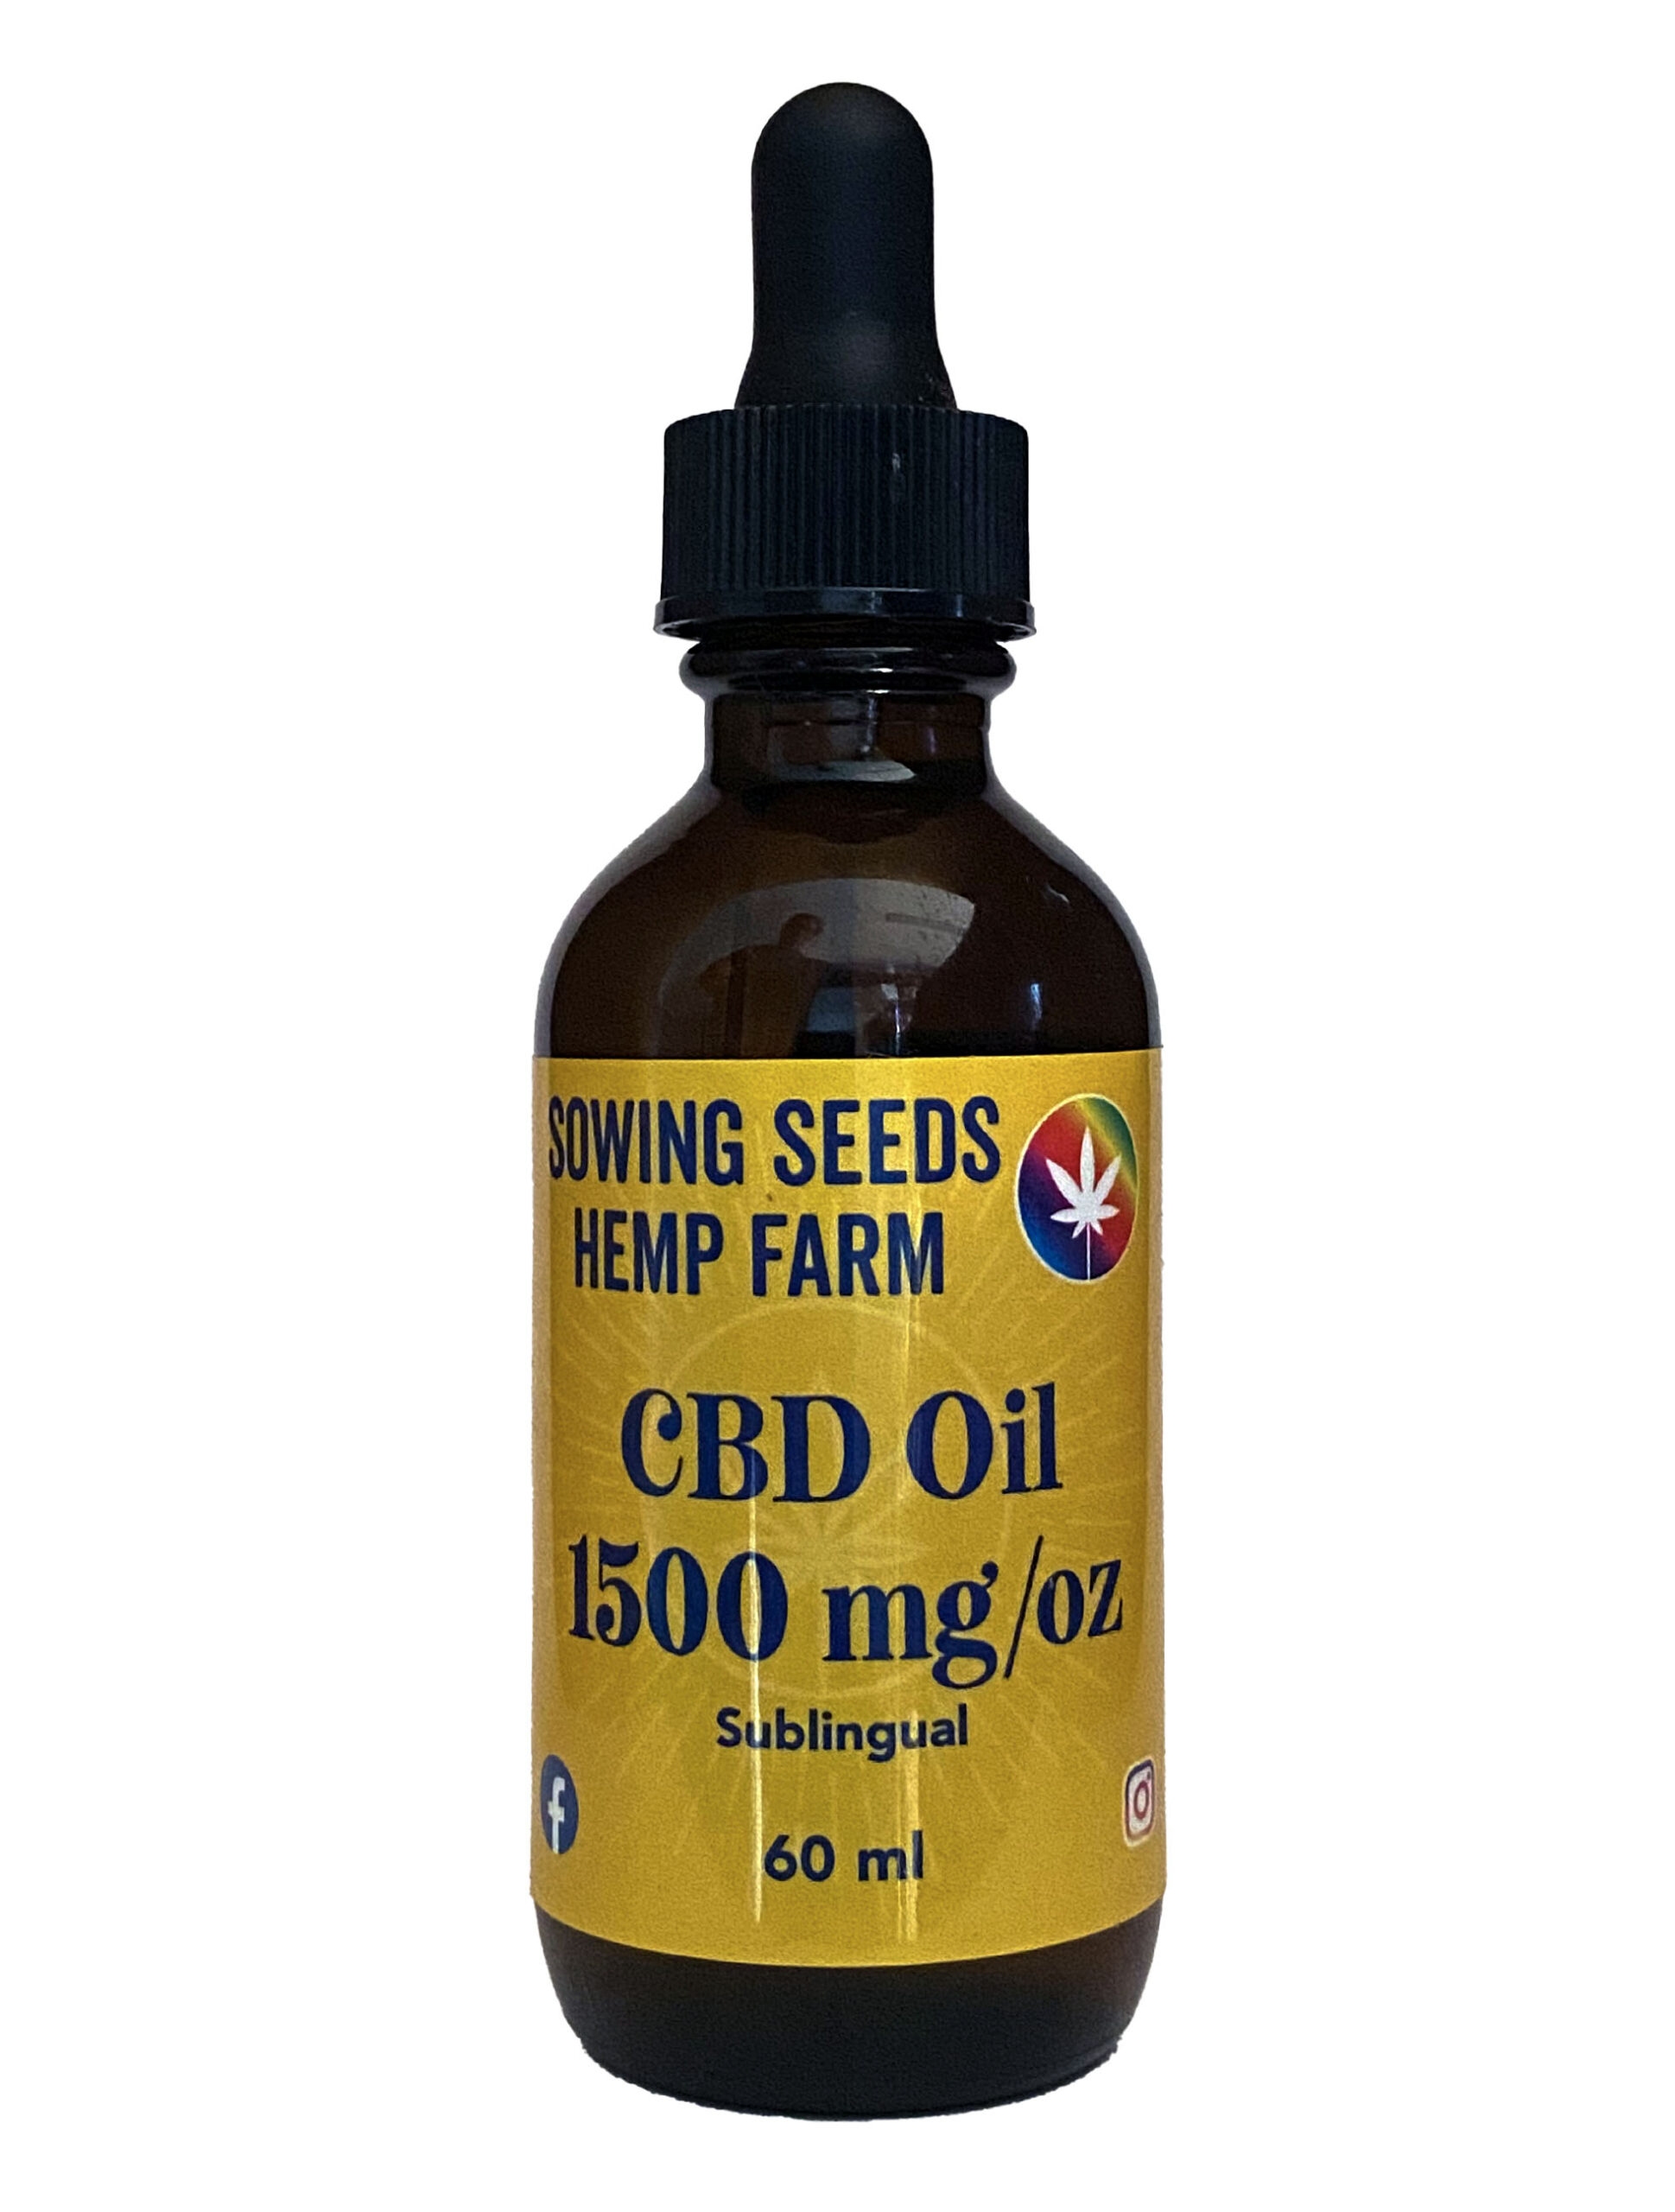 Cbd Oil - Support Your Health And Wellness | Sowing Seeds Hemp Farm